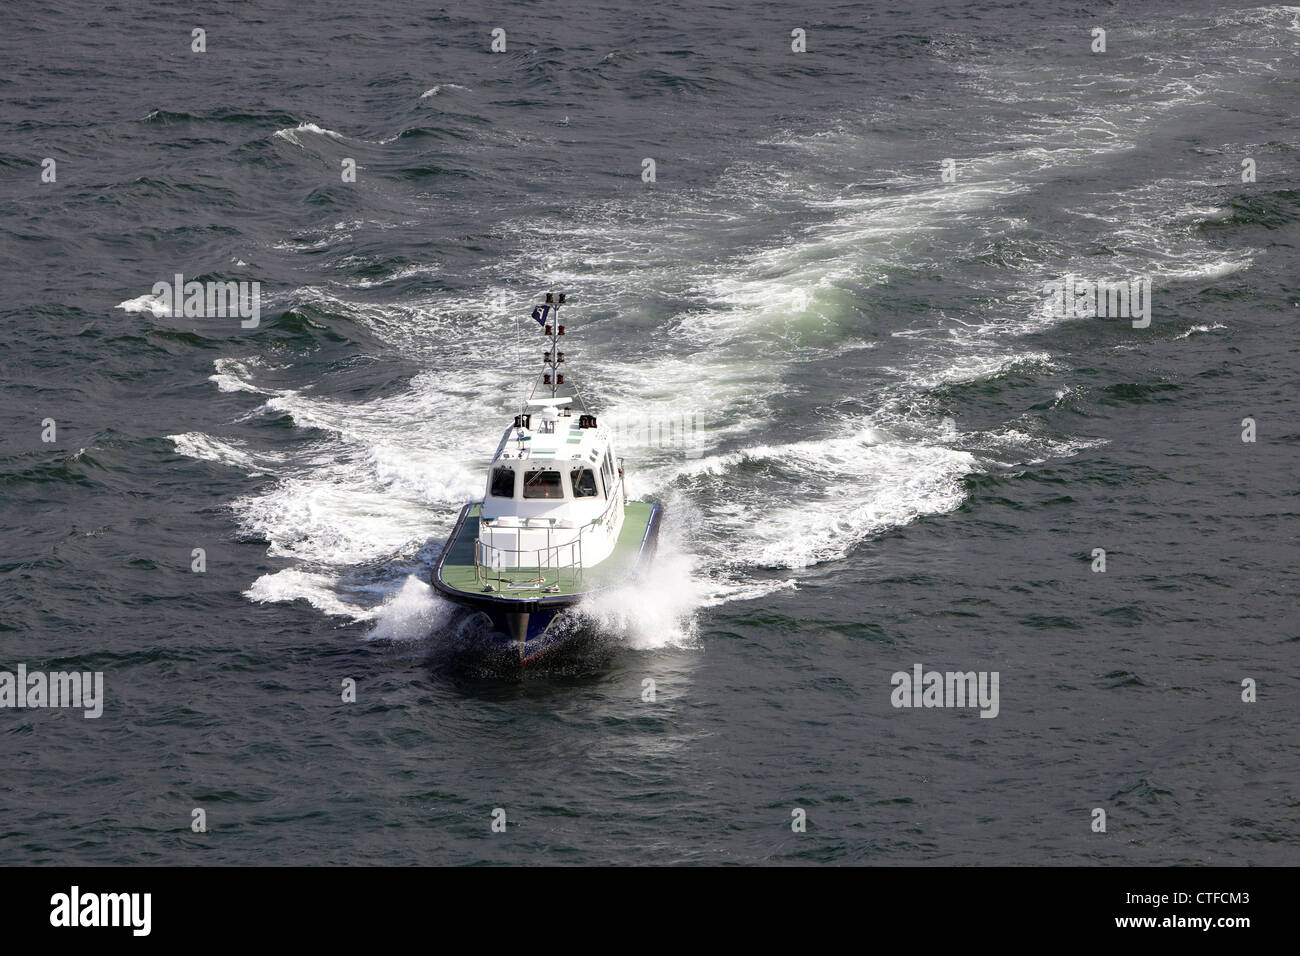 Pilot boat in bay of biscay Stock Photo